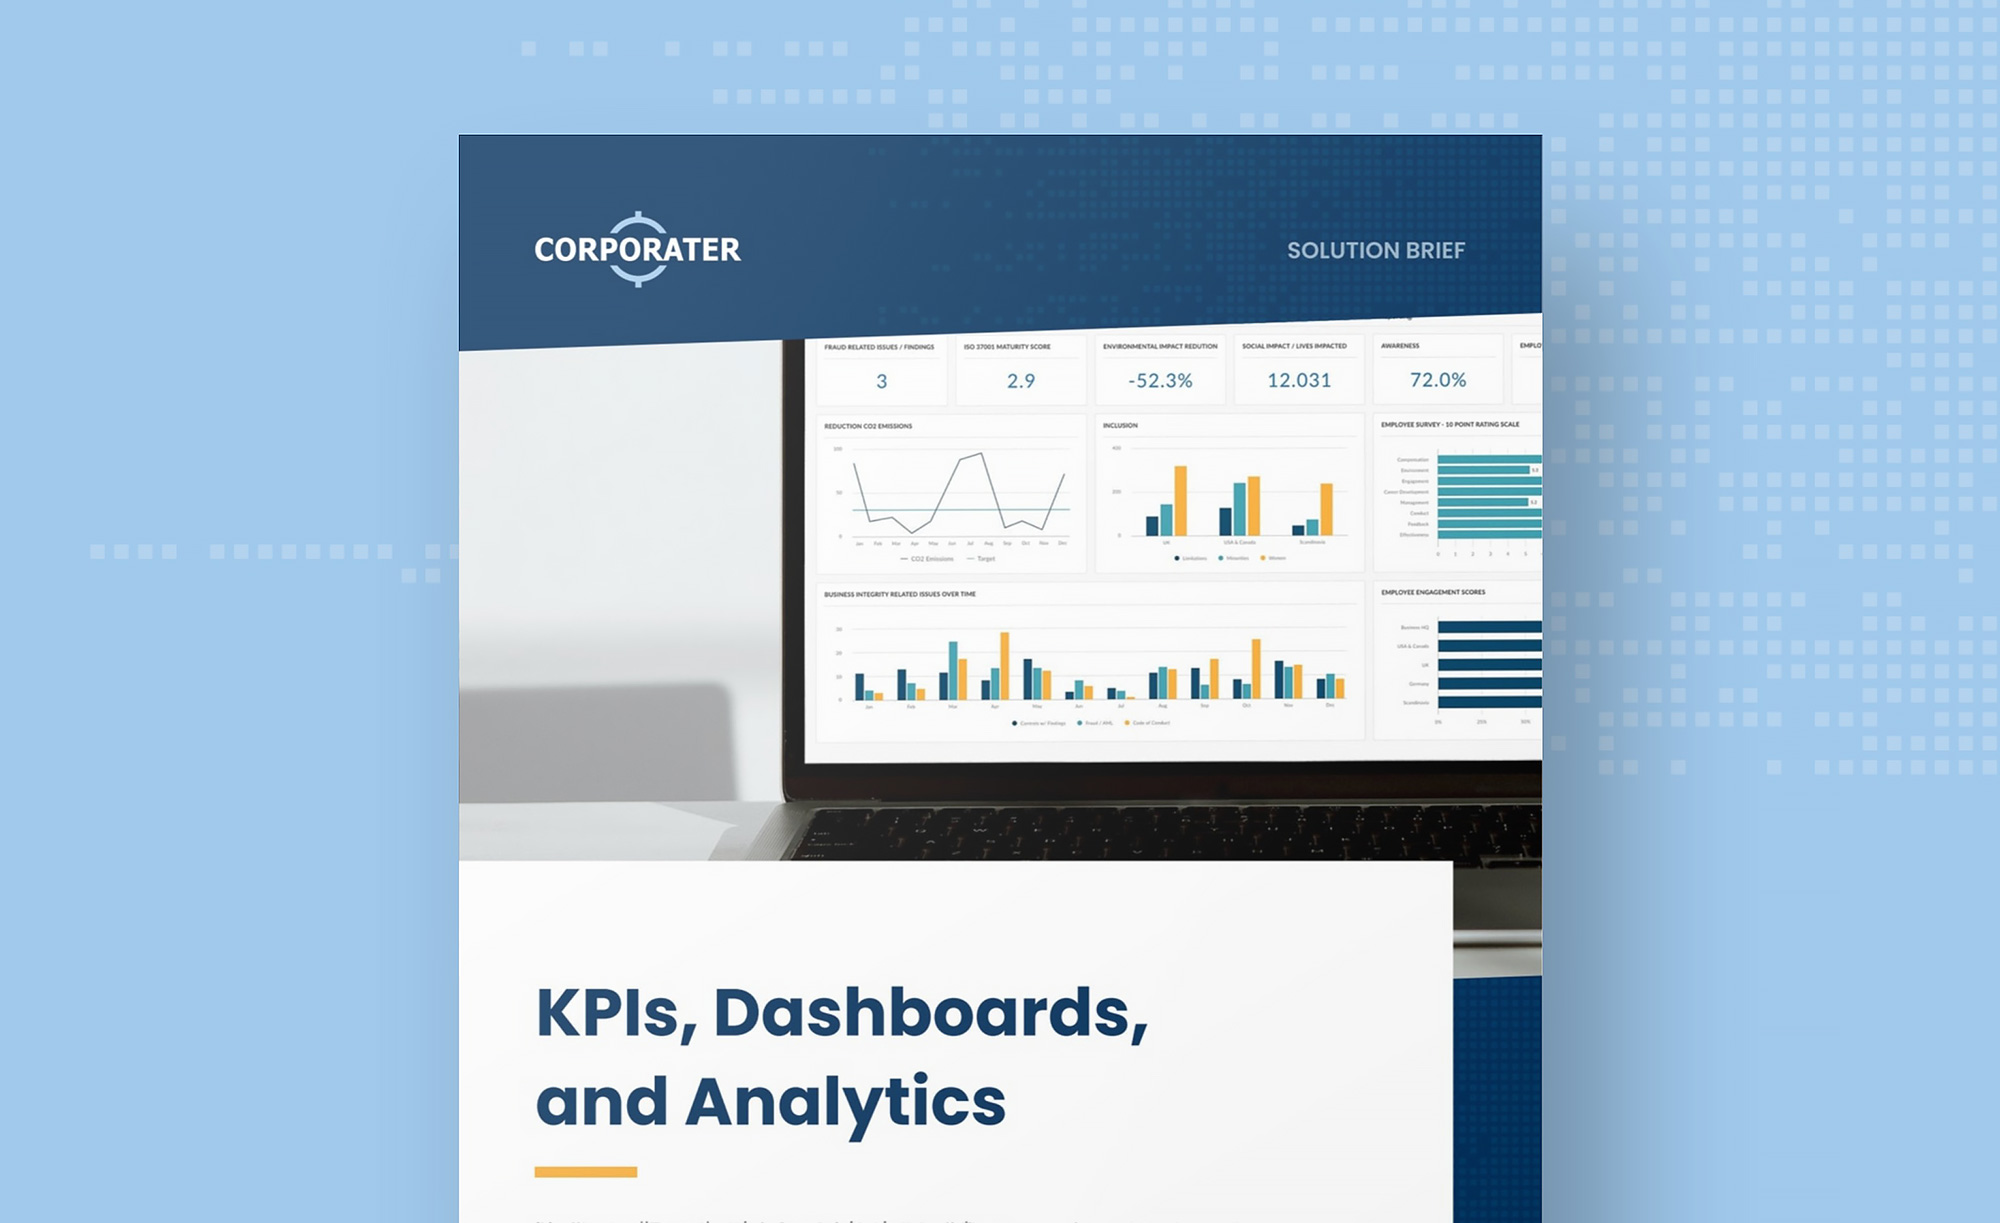 Corporater_KPIs-Dashboards-And-Analytics_SolutionBrief